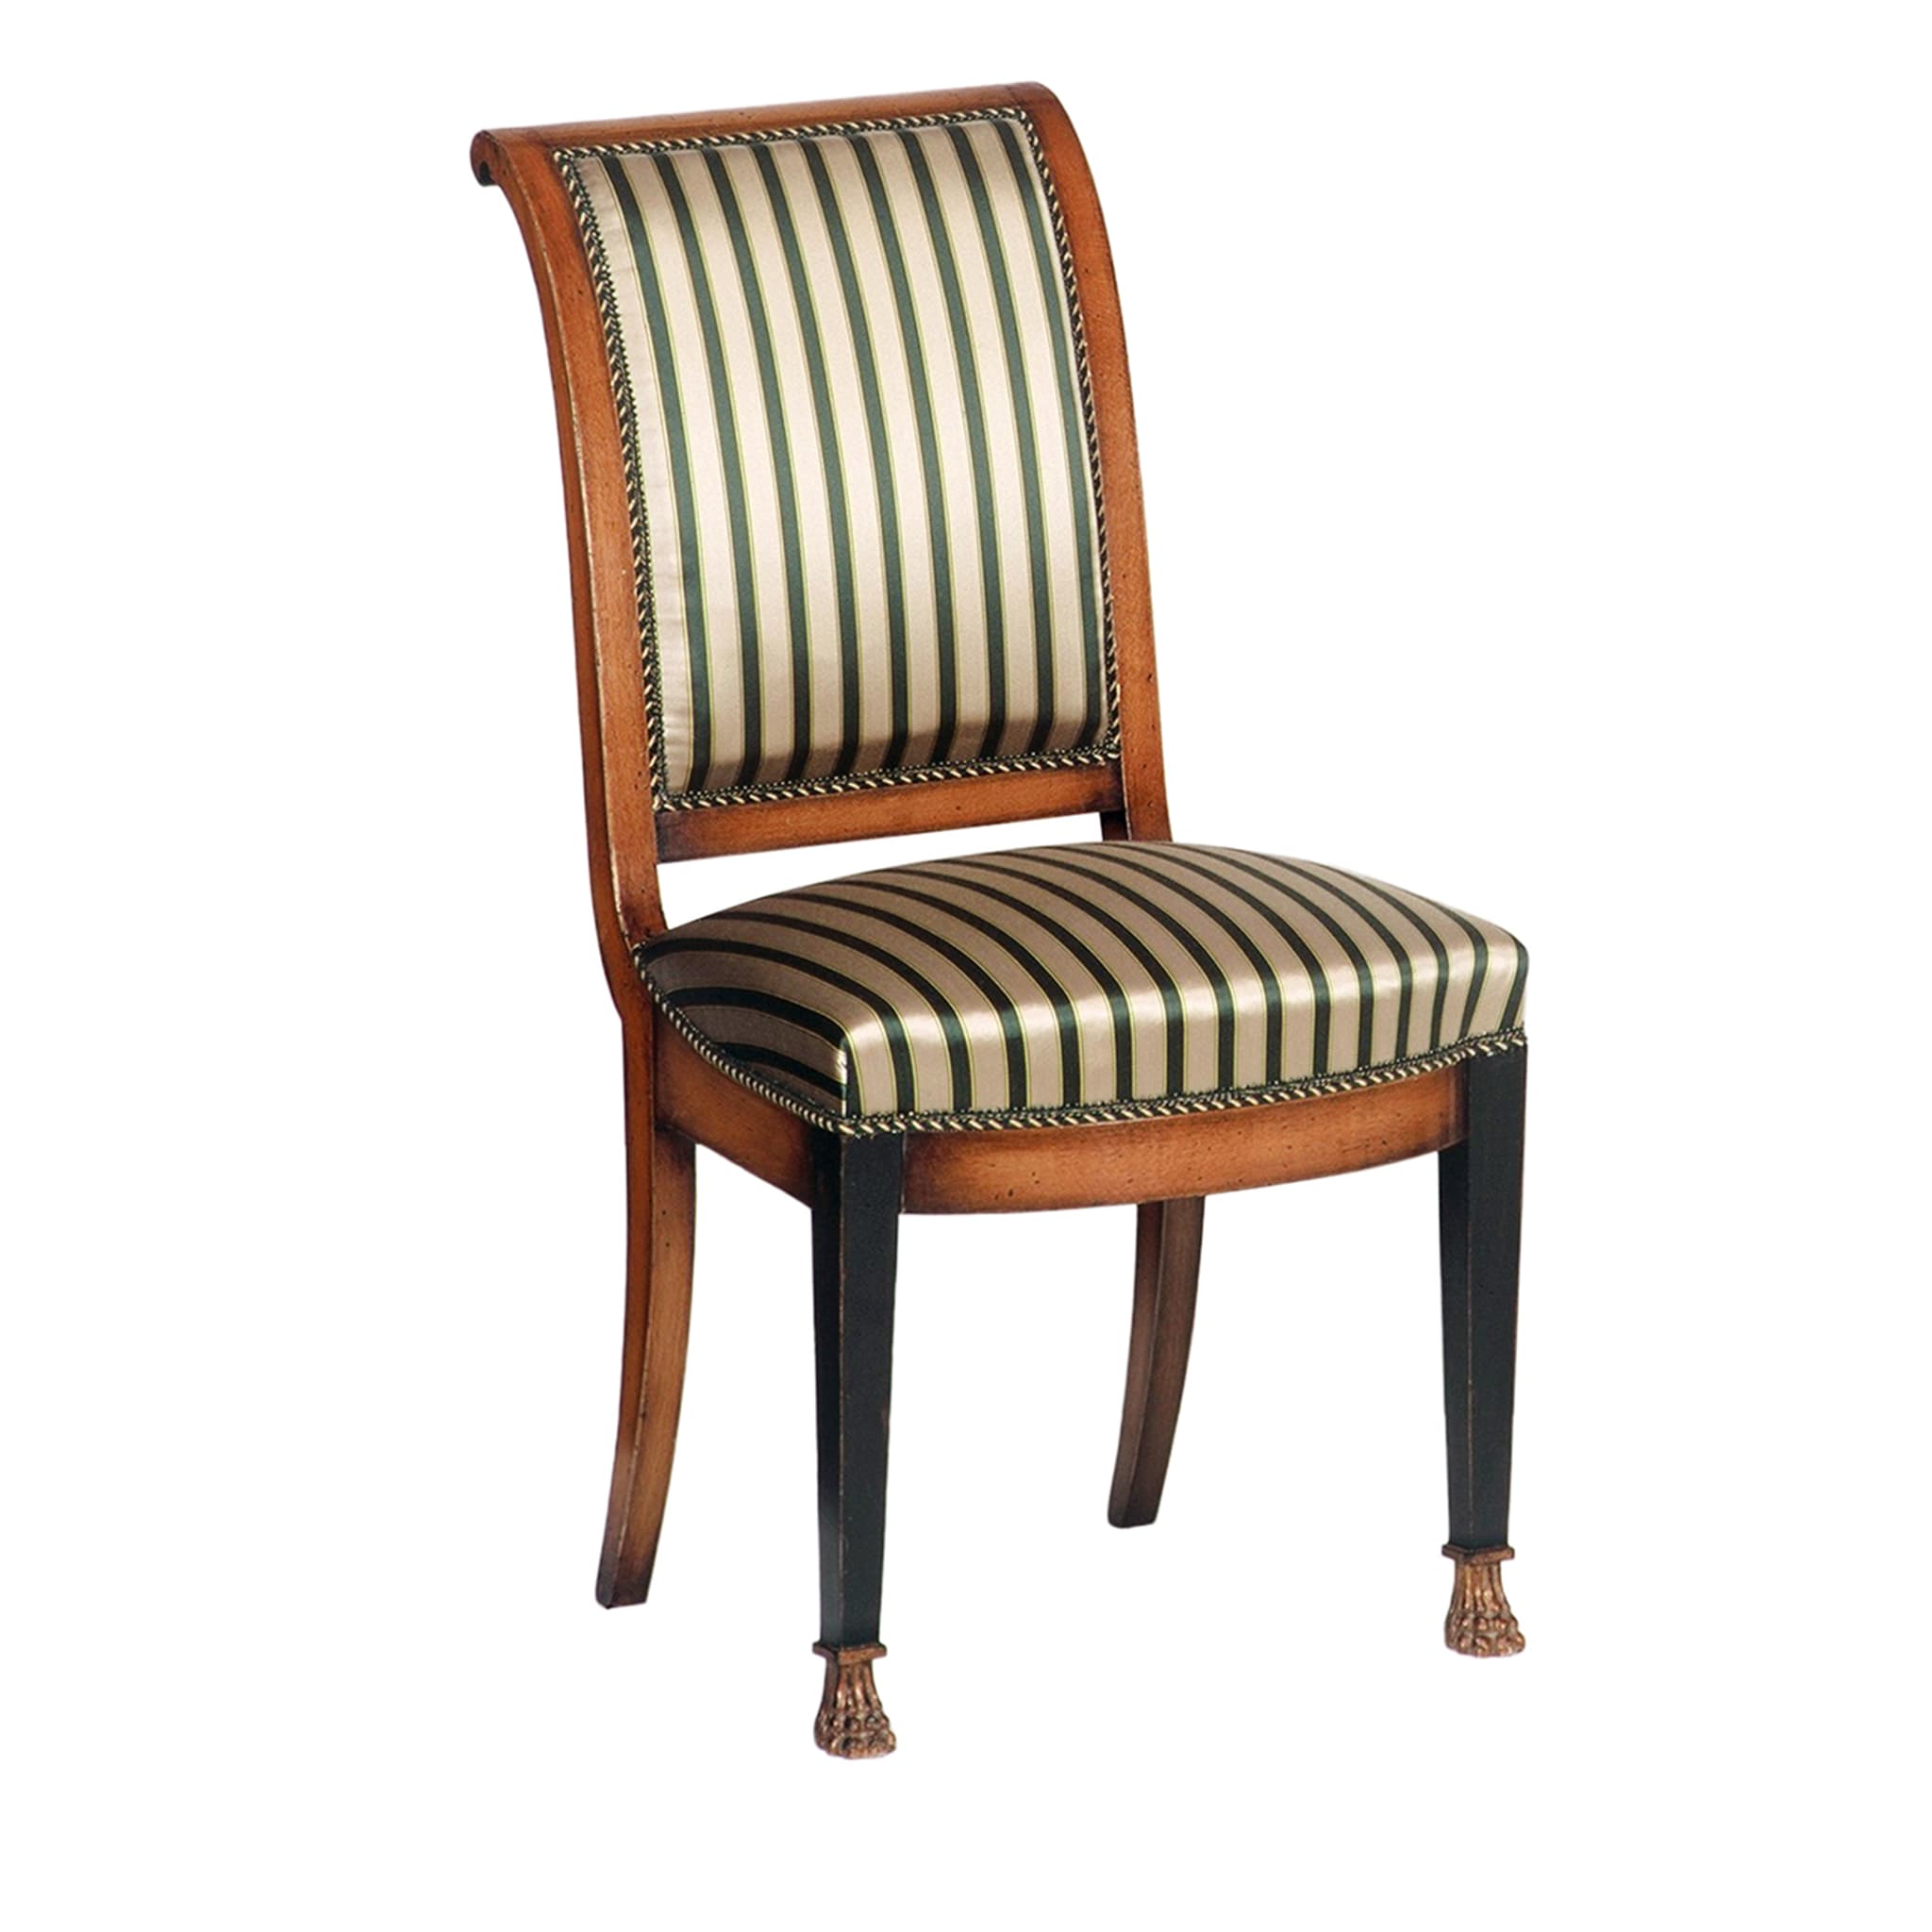 English Empire-Style Striped Beech Chair - Main view